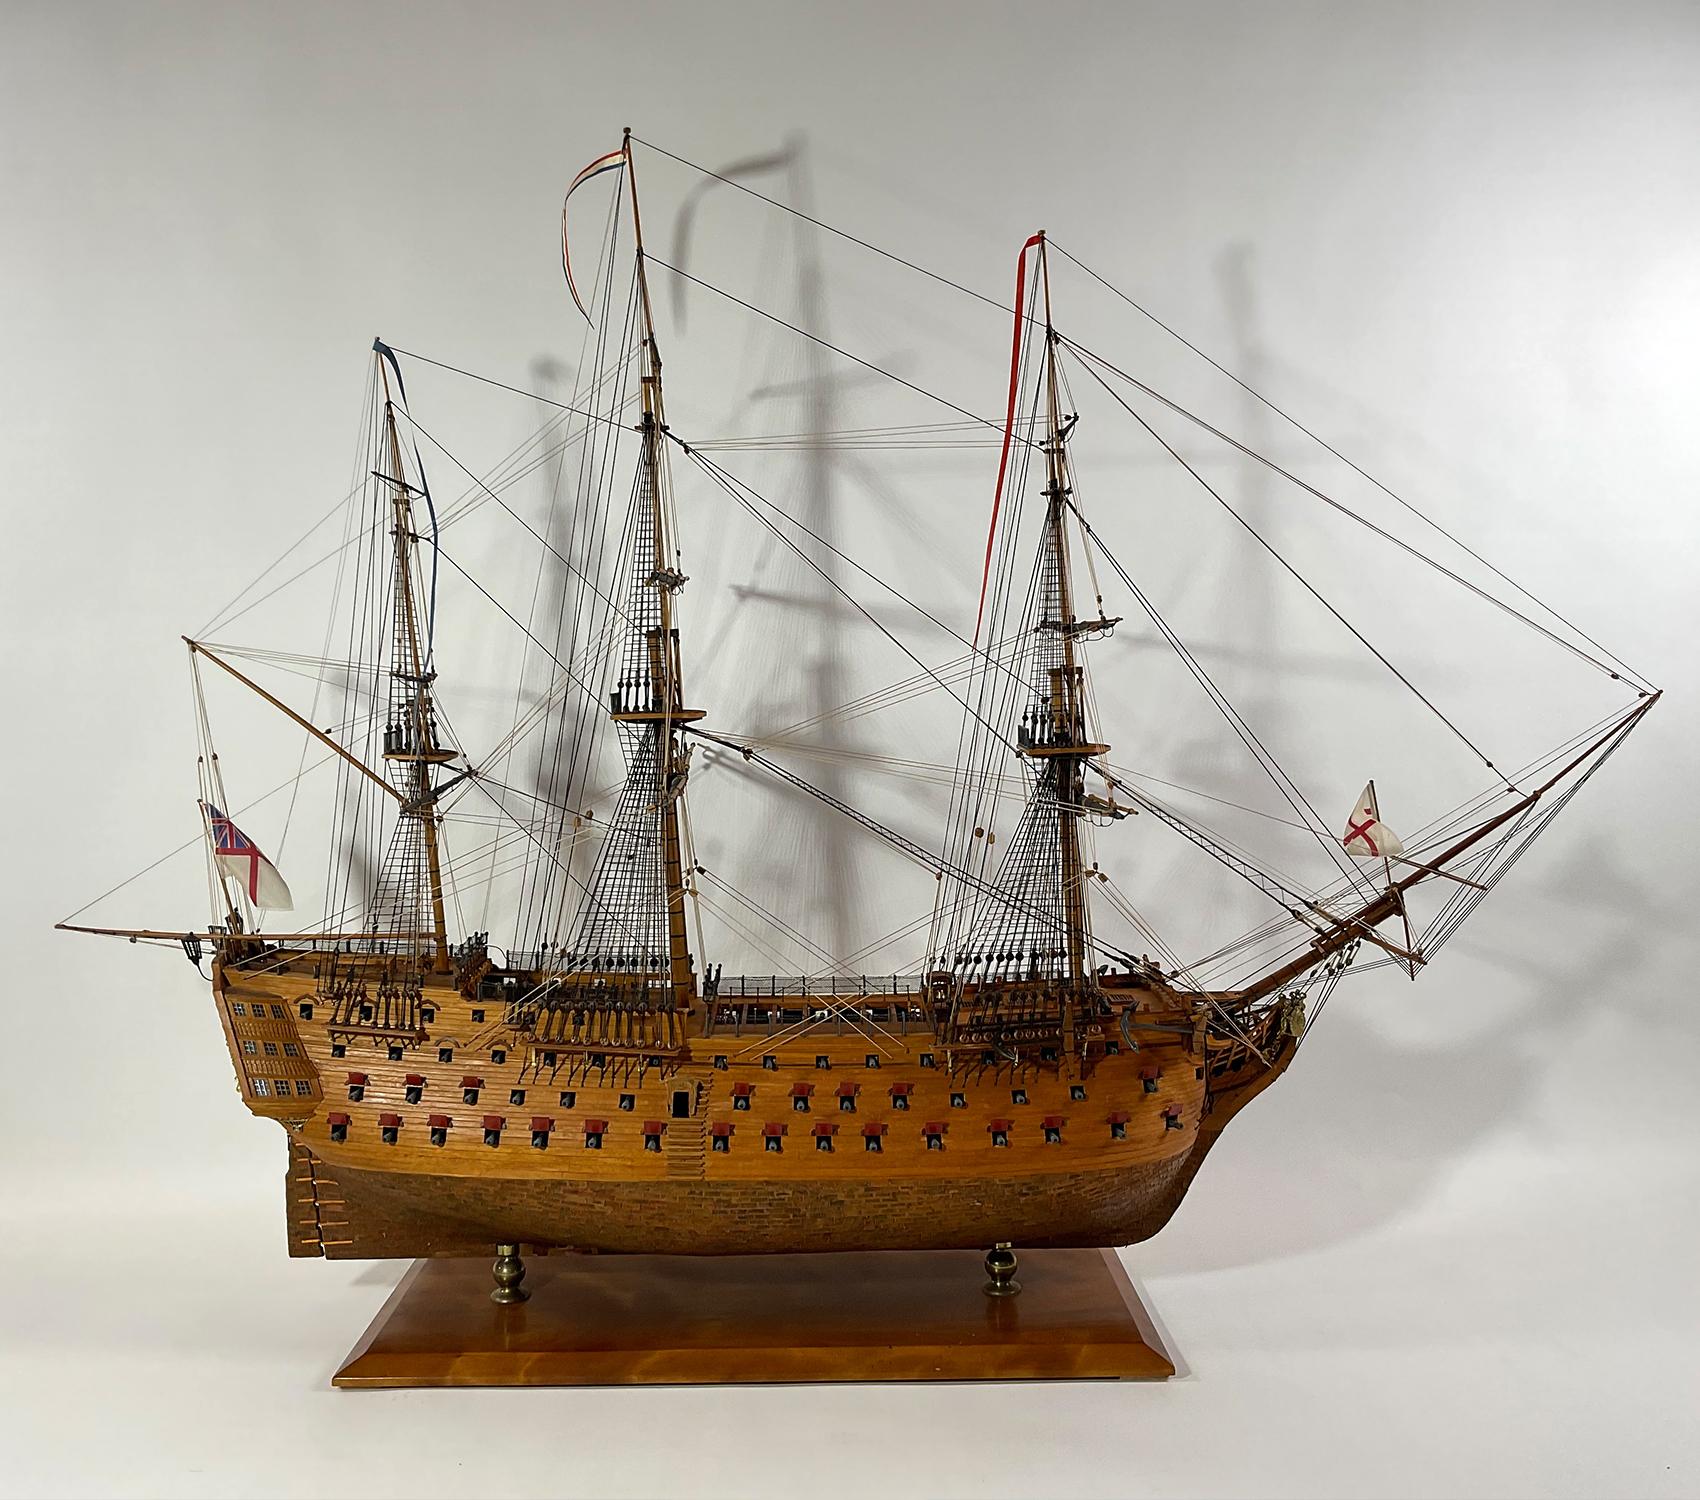 Plank on frame model of the famous English warship HMS Victory. This model is planked in varnished walnut above the waterline and copper sheathed below. Fully rigged with all appropriate cords. Awesome workmanship on this stately vessel. Countless